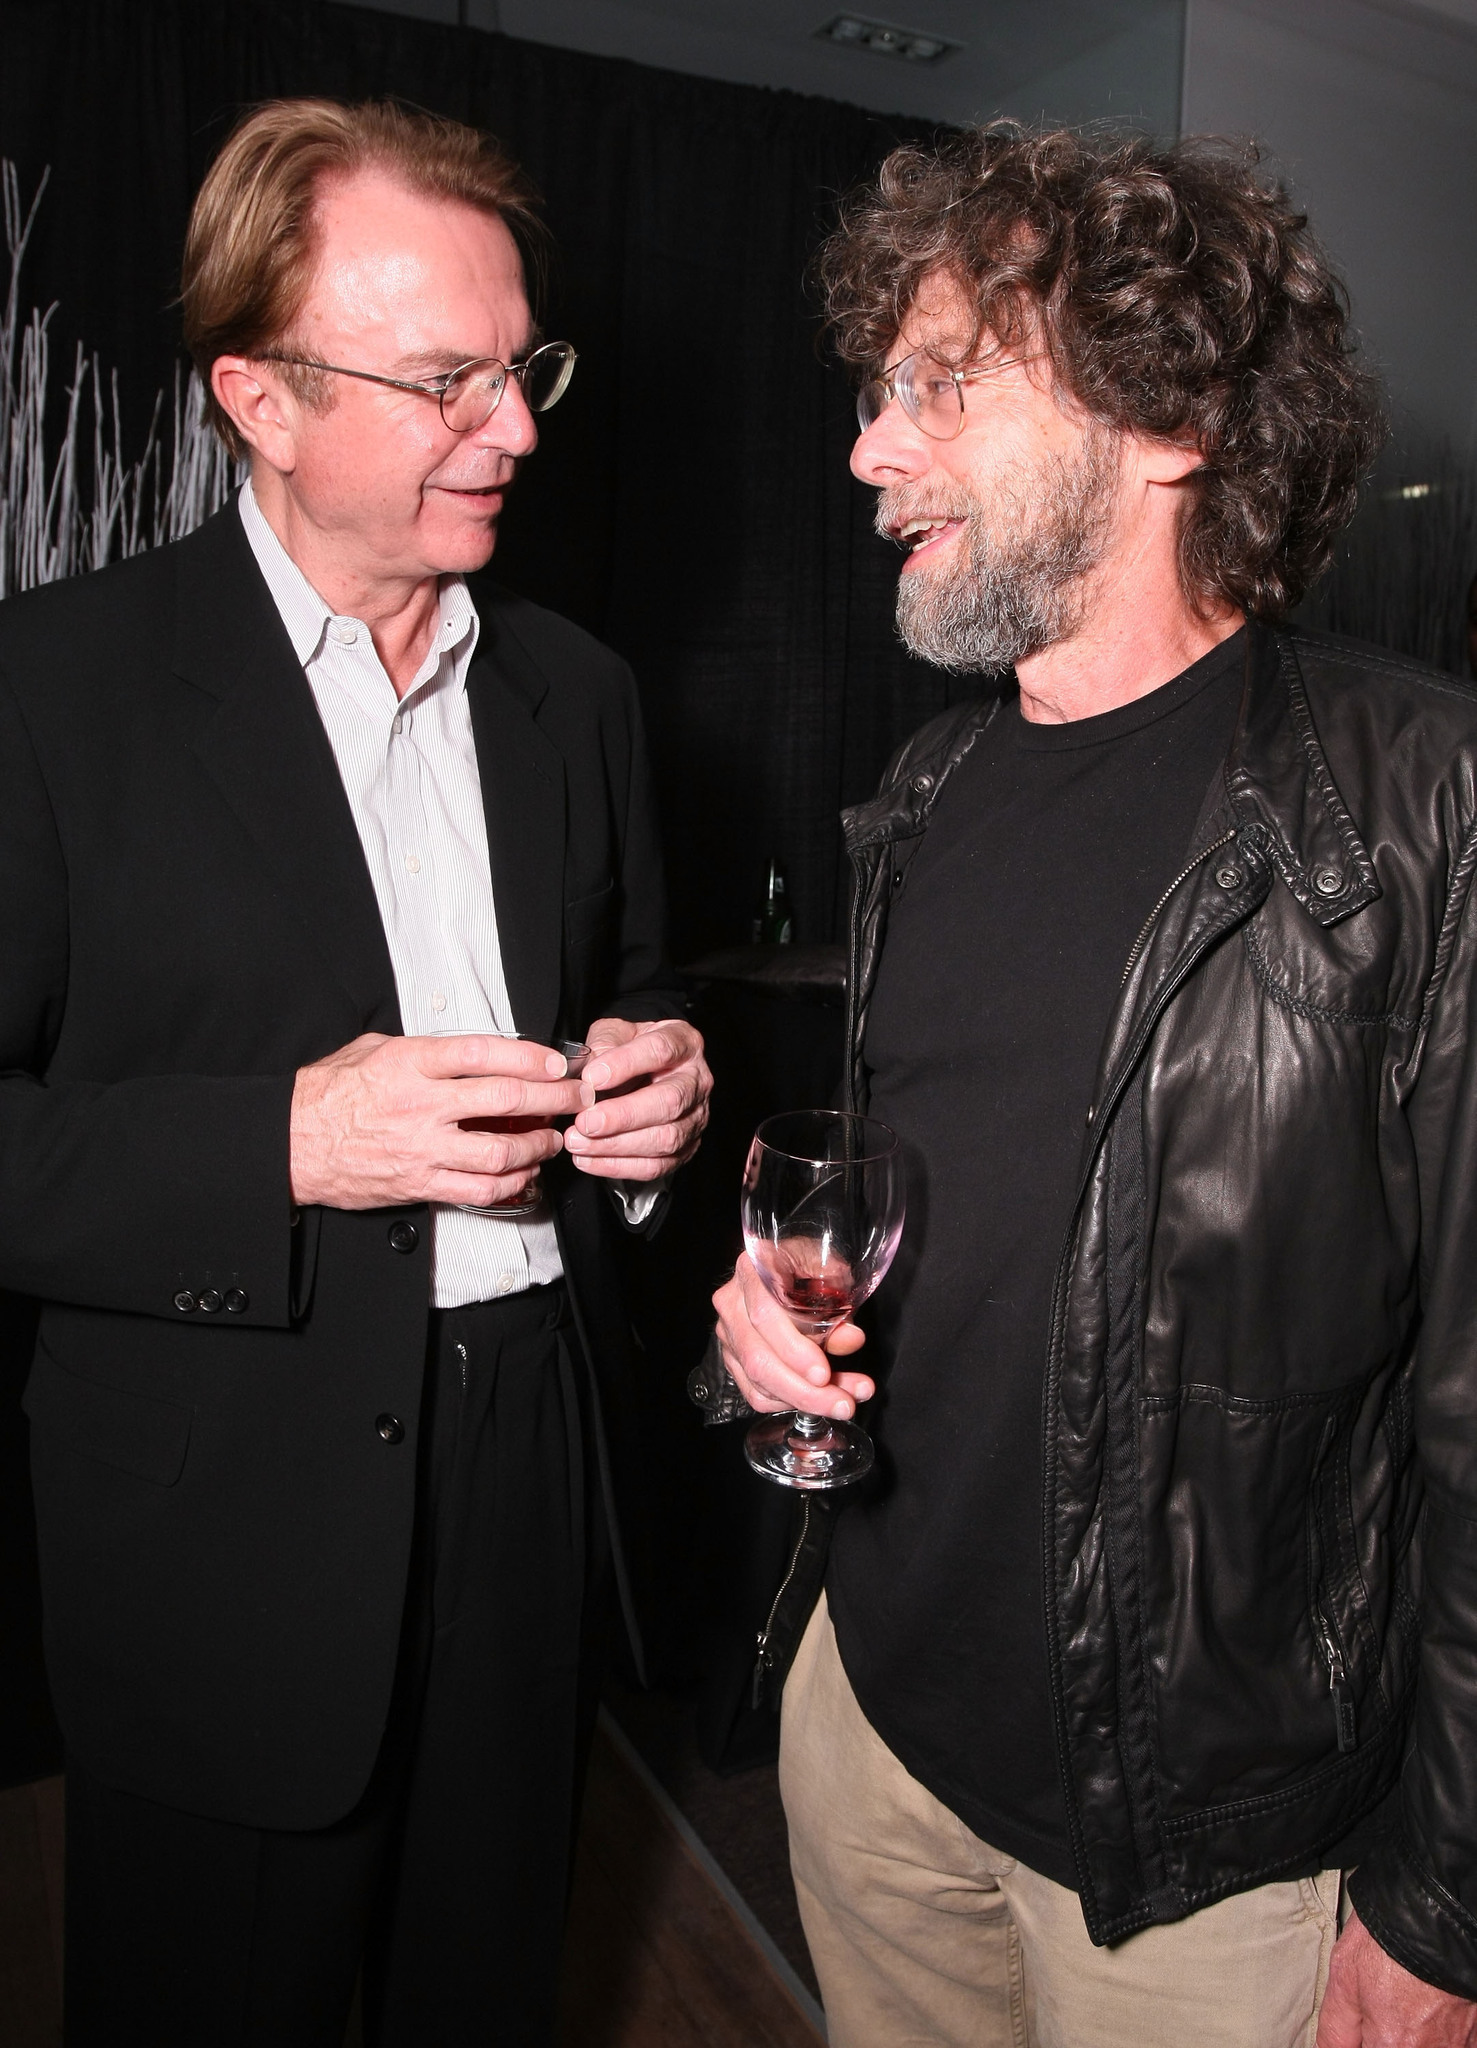 Actor Sam Neill (L) and Steve Schwartz attend The Road Dinner Hosted By The Creative Coalition held at the Spice Room during the 2009 Toronto International Film Festival on September 13, 2009 in Toronto, Canada.